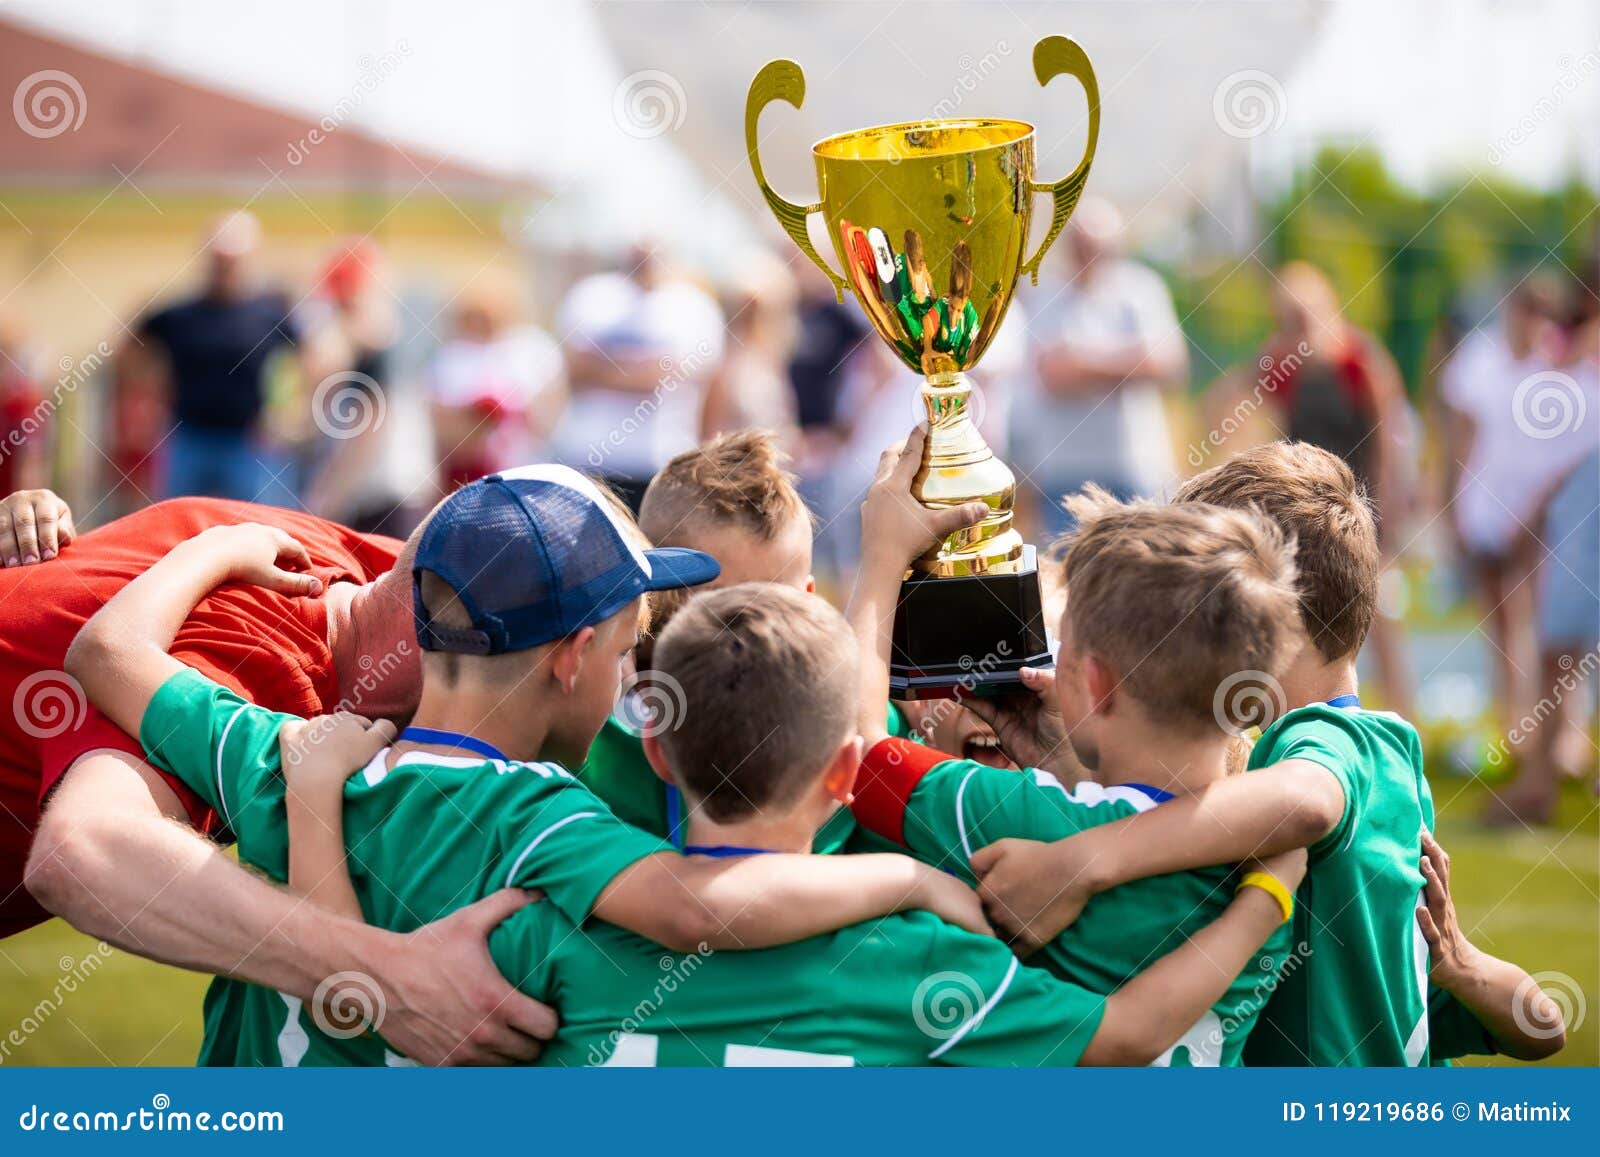 Trophy Pesonalized Bank: Soccer Friendly Kids Great for Future Soccer Player Award Team 